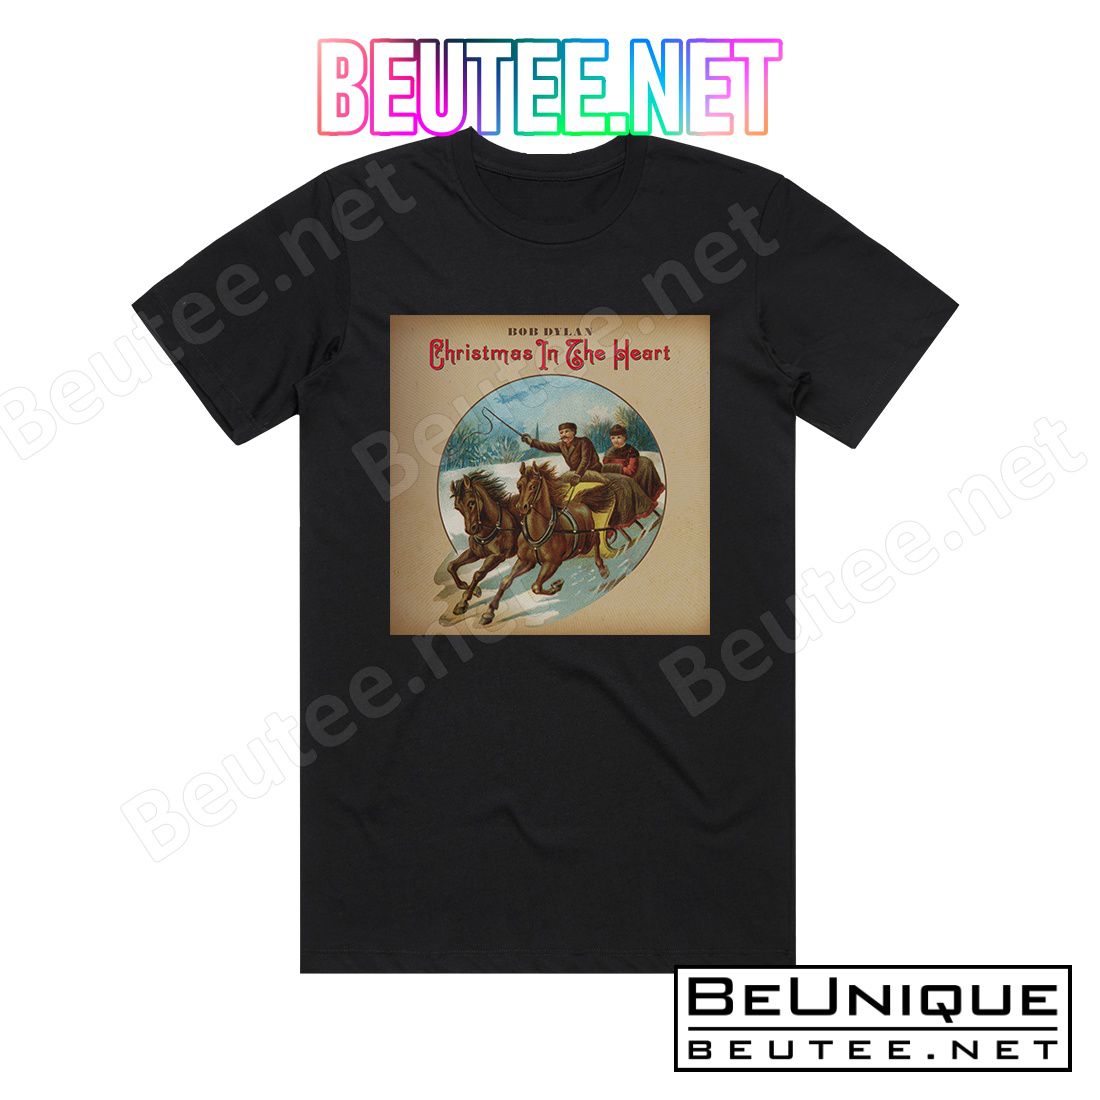 Bob Dylan Christmas In The Heart Album Cover T-Shirt